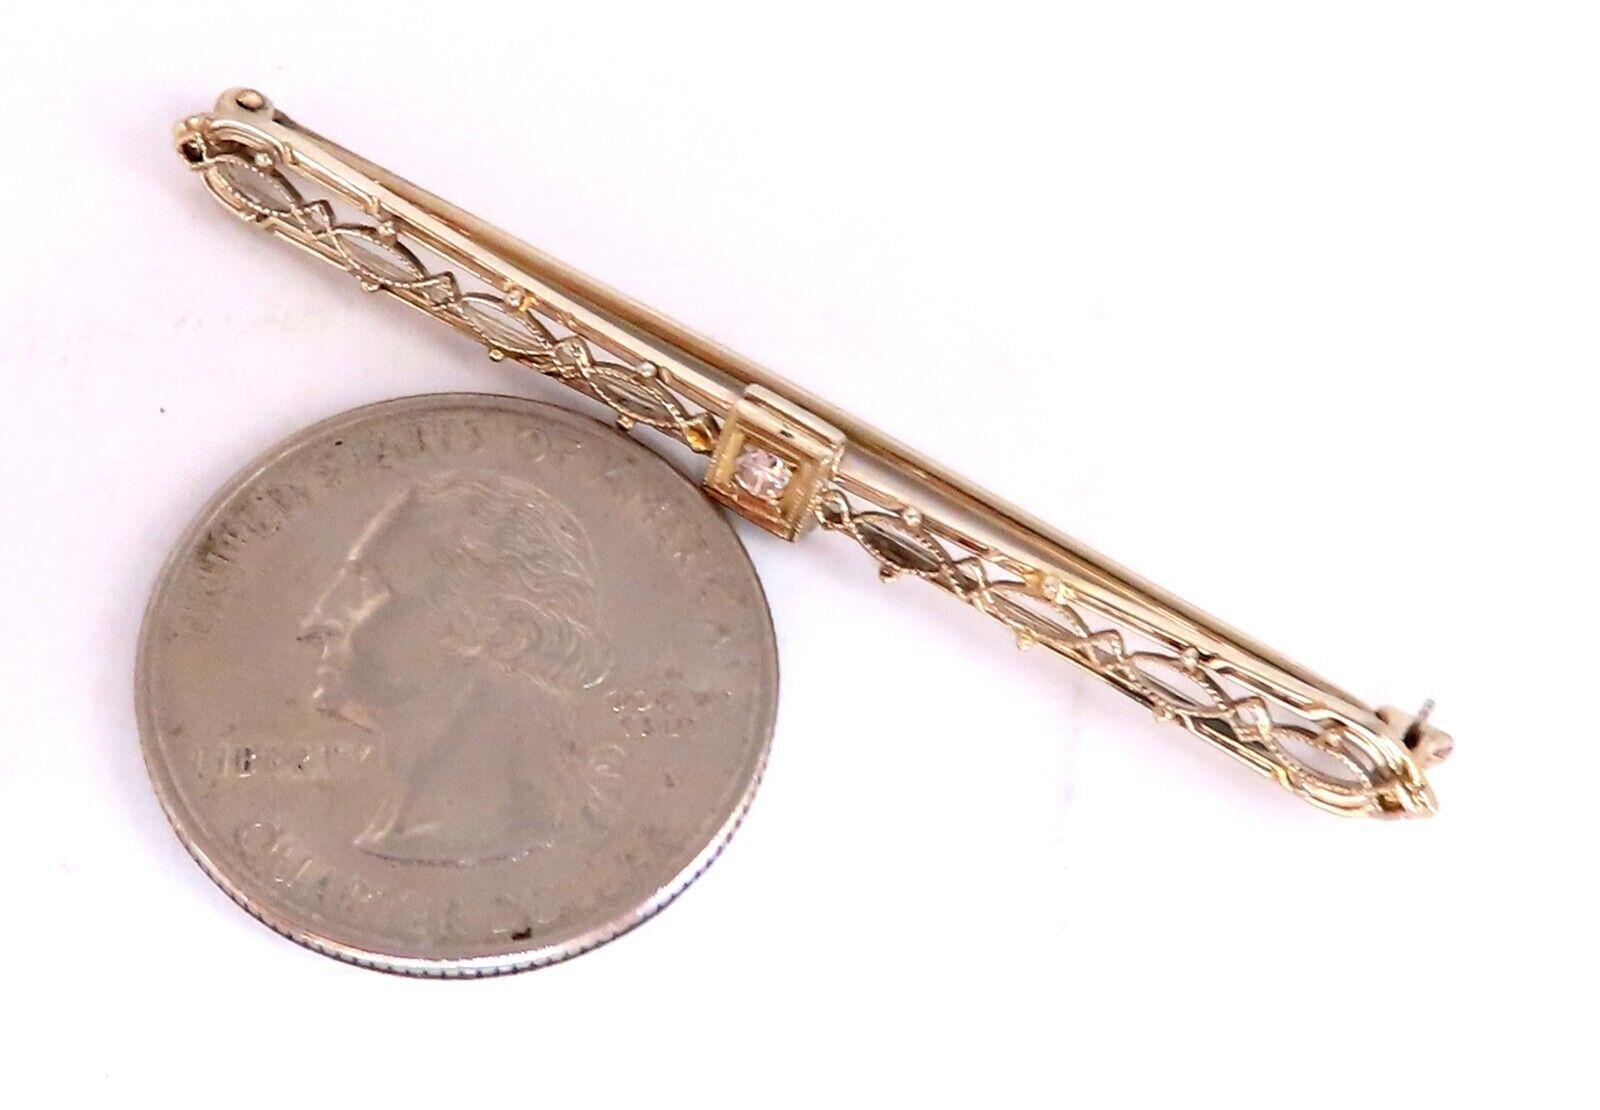 Vintage Gold Brooch Pin

.05ct natural round diamonds

H-color Vs-2 Clarity

2.25 inch long 

Handmade 

14kt Gold

2.7 Grams.